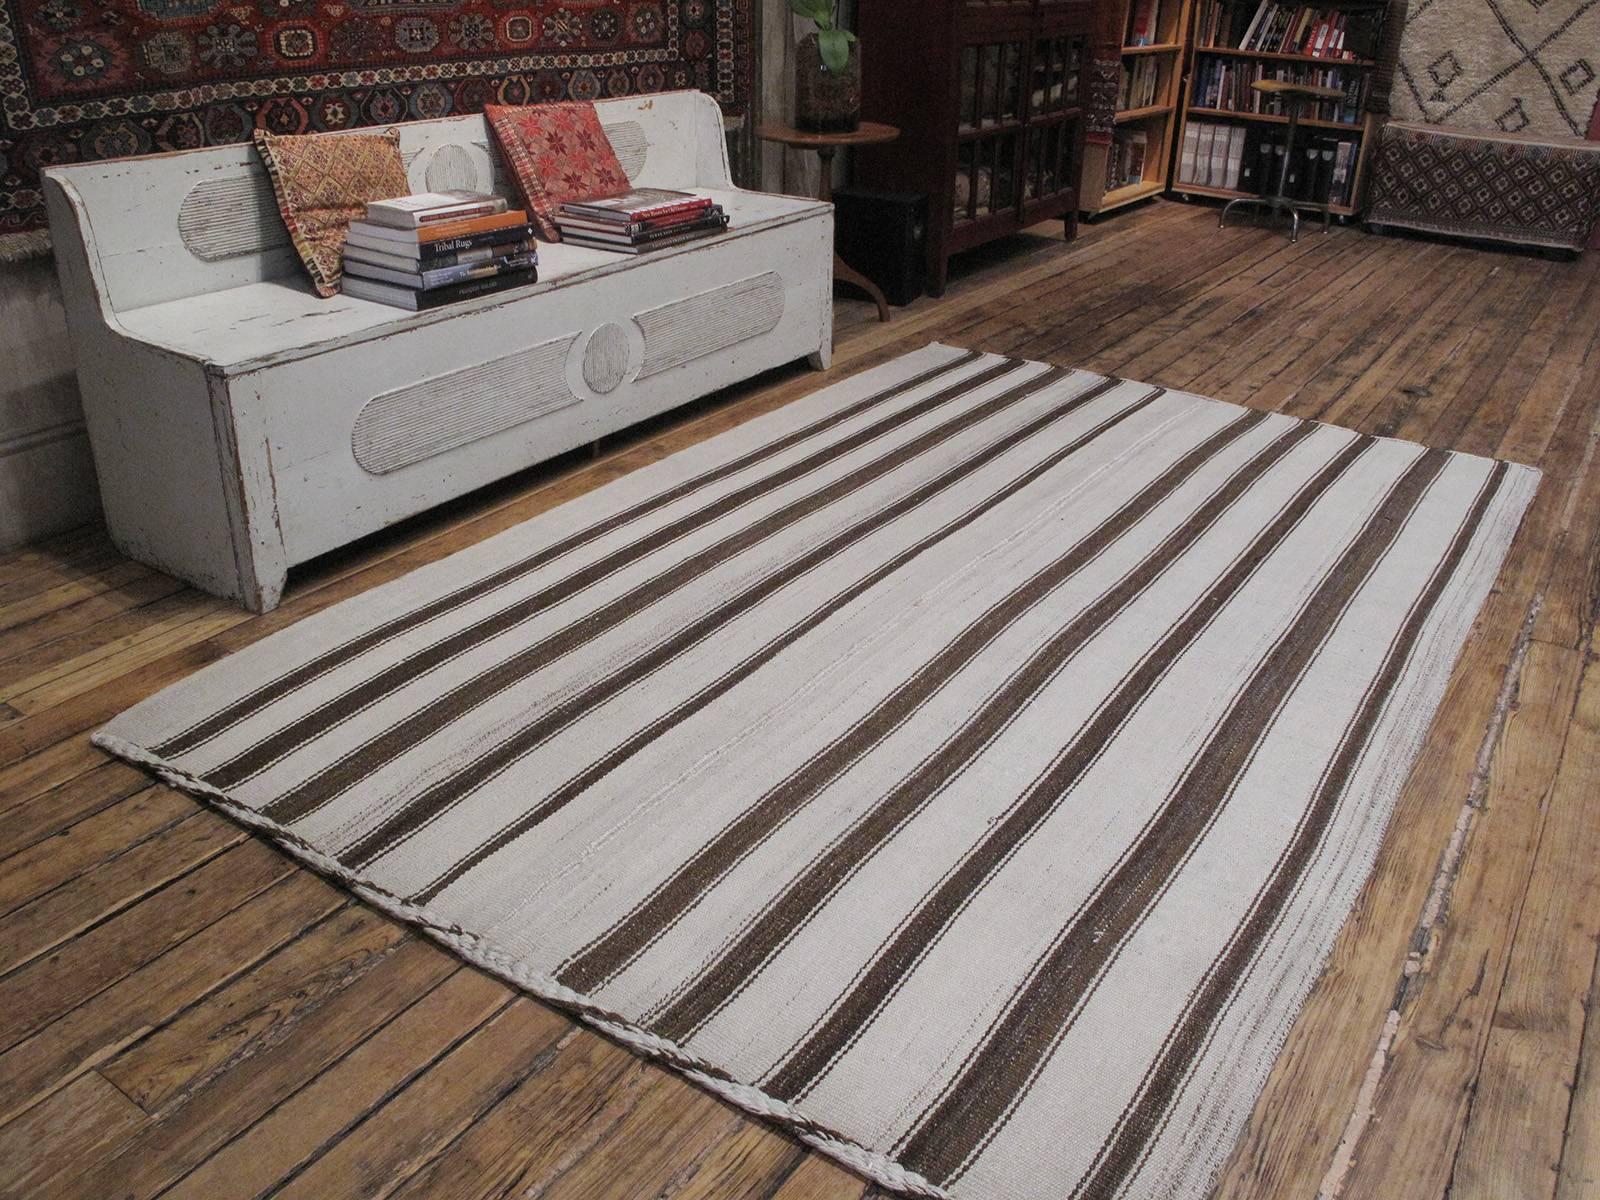 A simple old tribal flat-weave from Central Turkey, woven entirely with wool in natural tones of ivory and brown in alternating stripes. Its authentic simplicity makes it infinitely more appealing than its modern imitators.